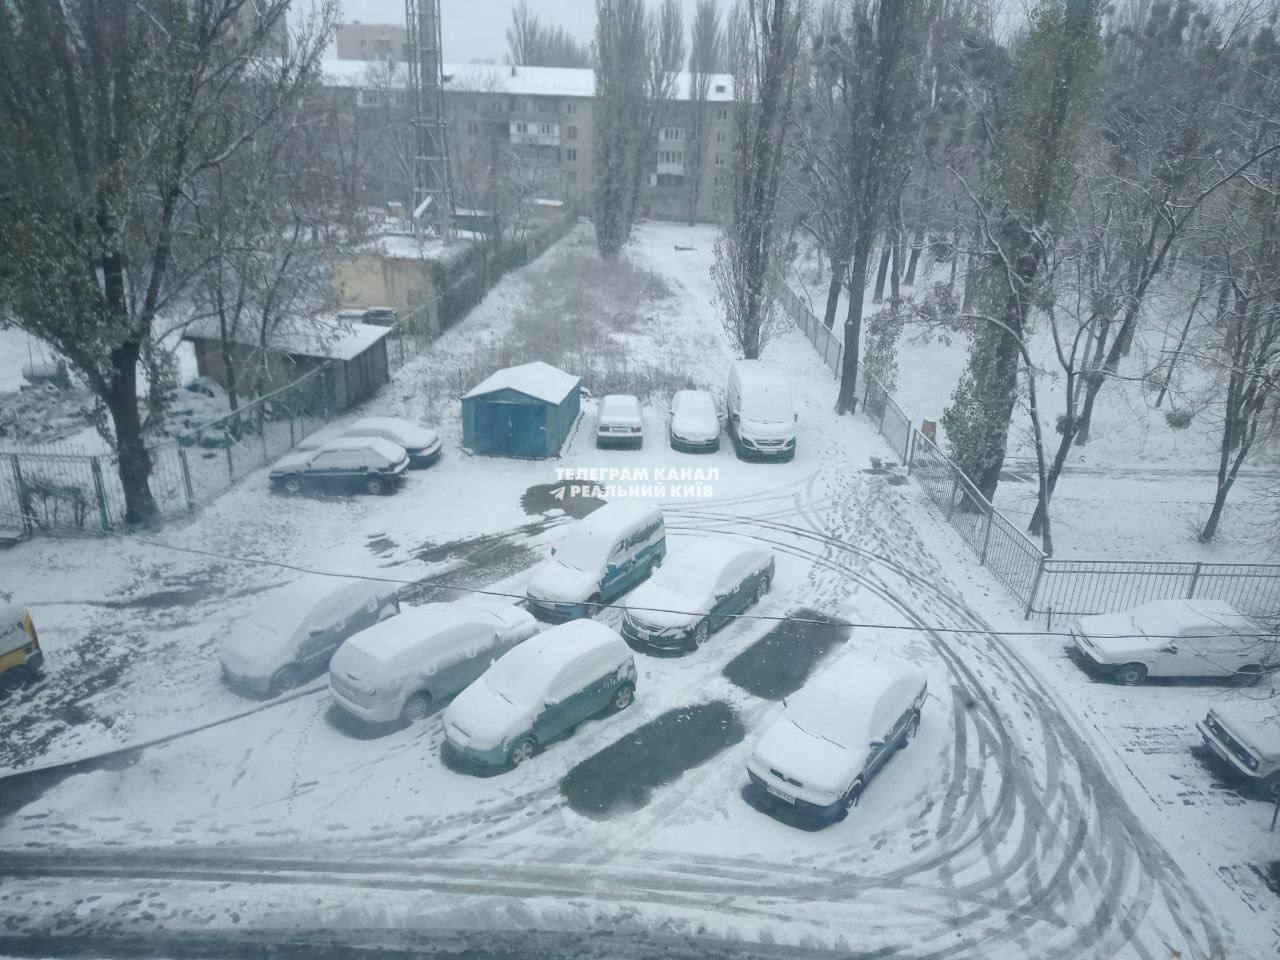 Real winter comes to Kyiv: roads covered with snow, drivers warned of ice. Photo and video